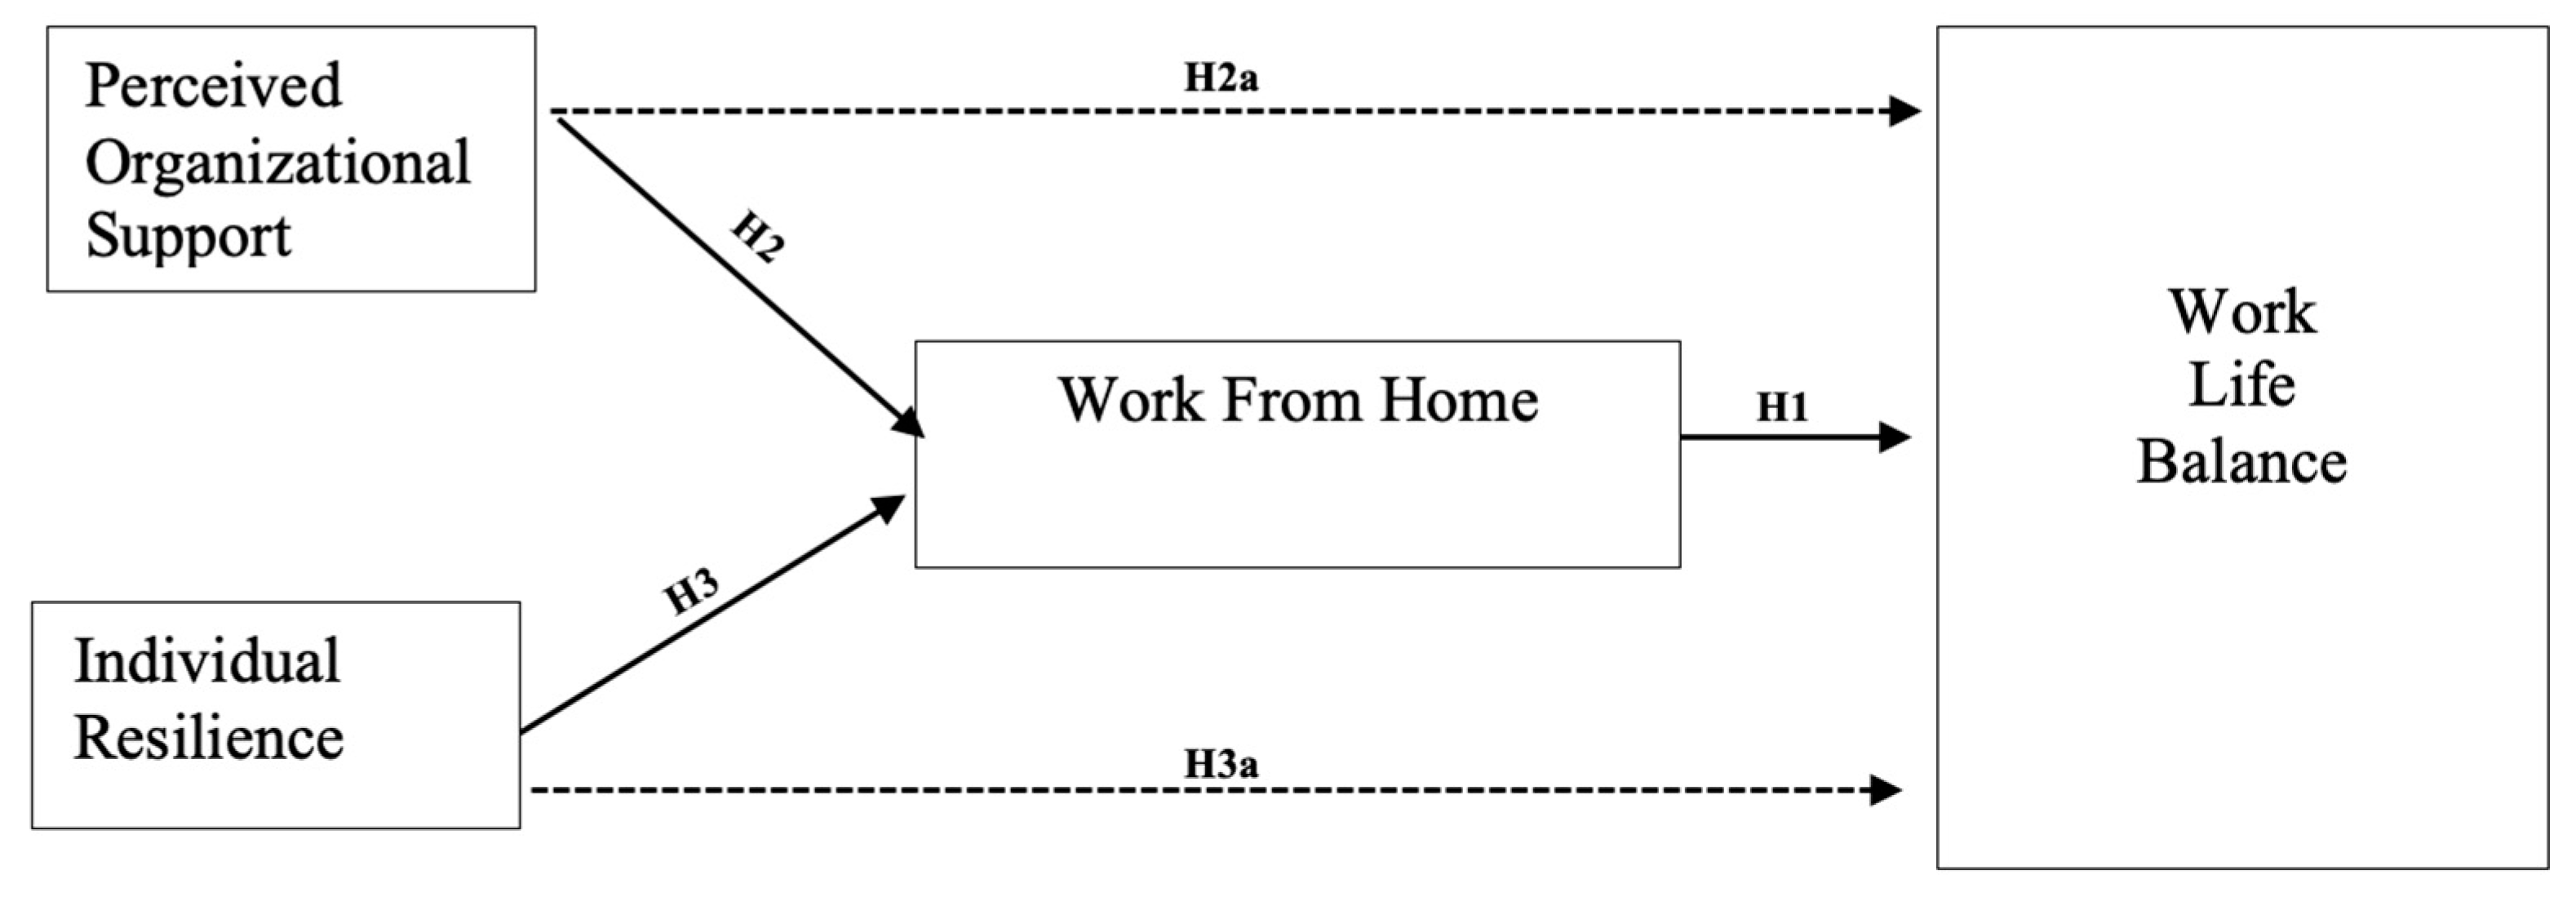 Work From Home - WFH - Definition, Importance, Steps & Example